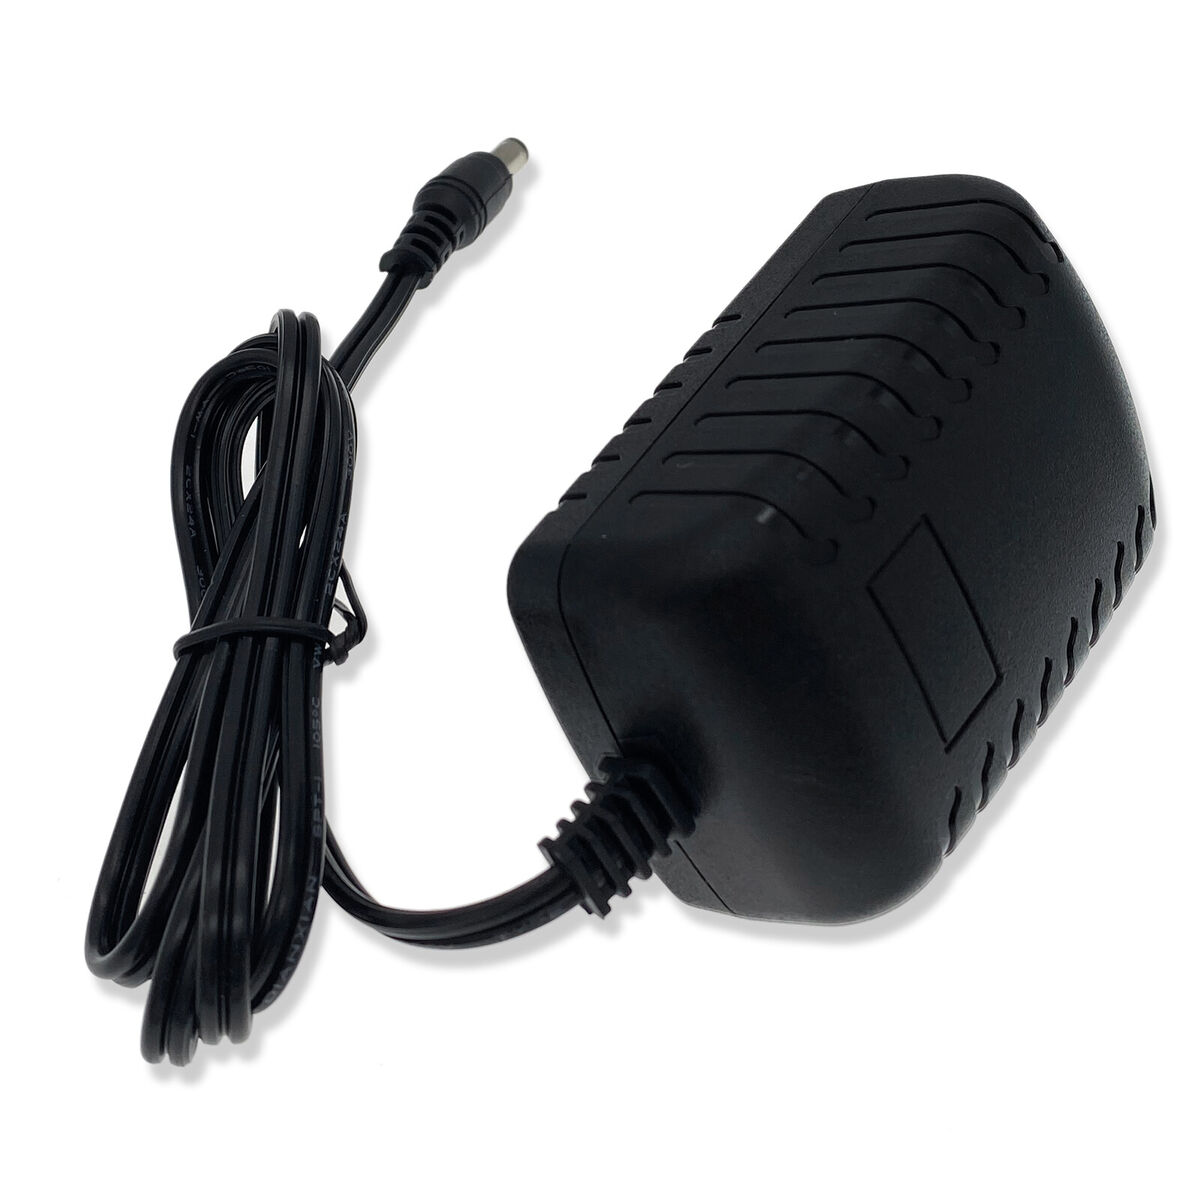 12V 1.5A 18W AC/DC POWER SUPPLY SWITCHING ADAPTER CHARGER For CCTV CAMERA  LED